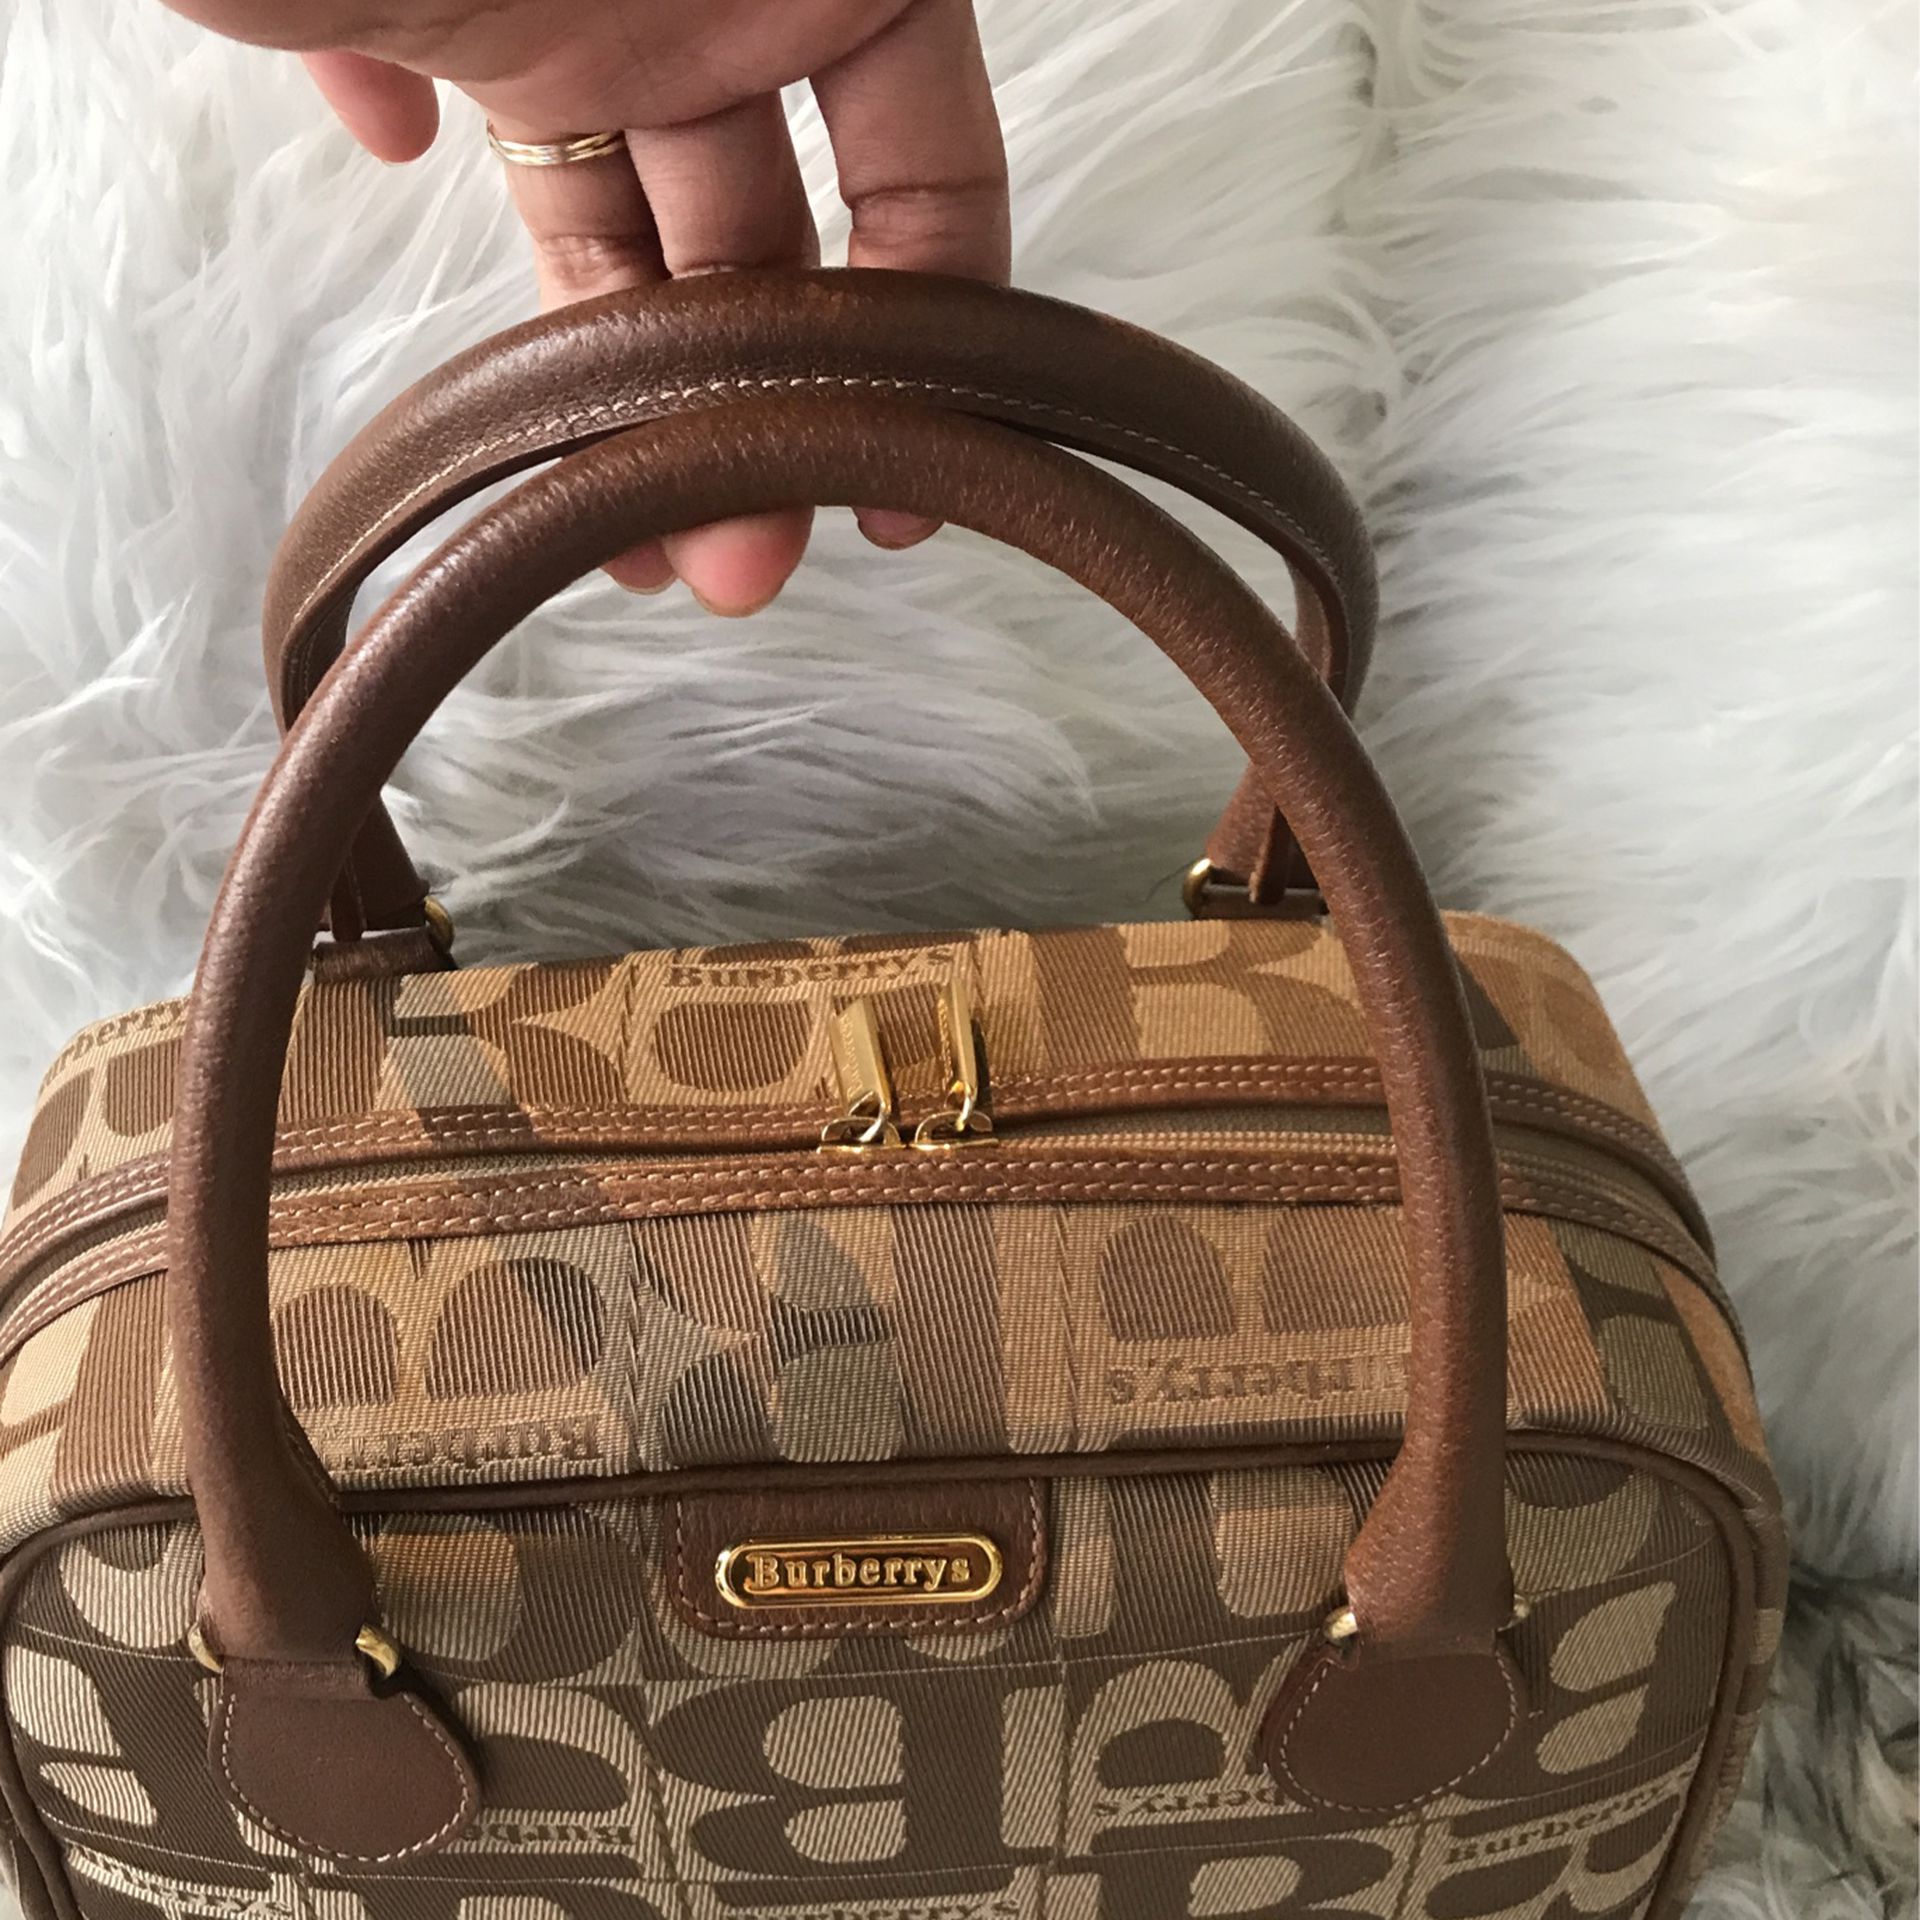 Burberry Reversible Tote Bag for Sale in Miramar, FL - OfferUp